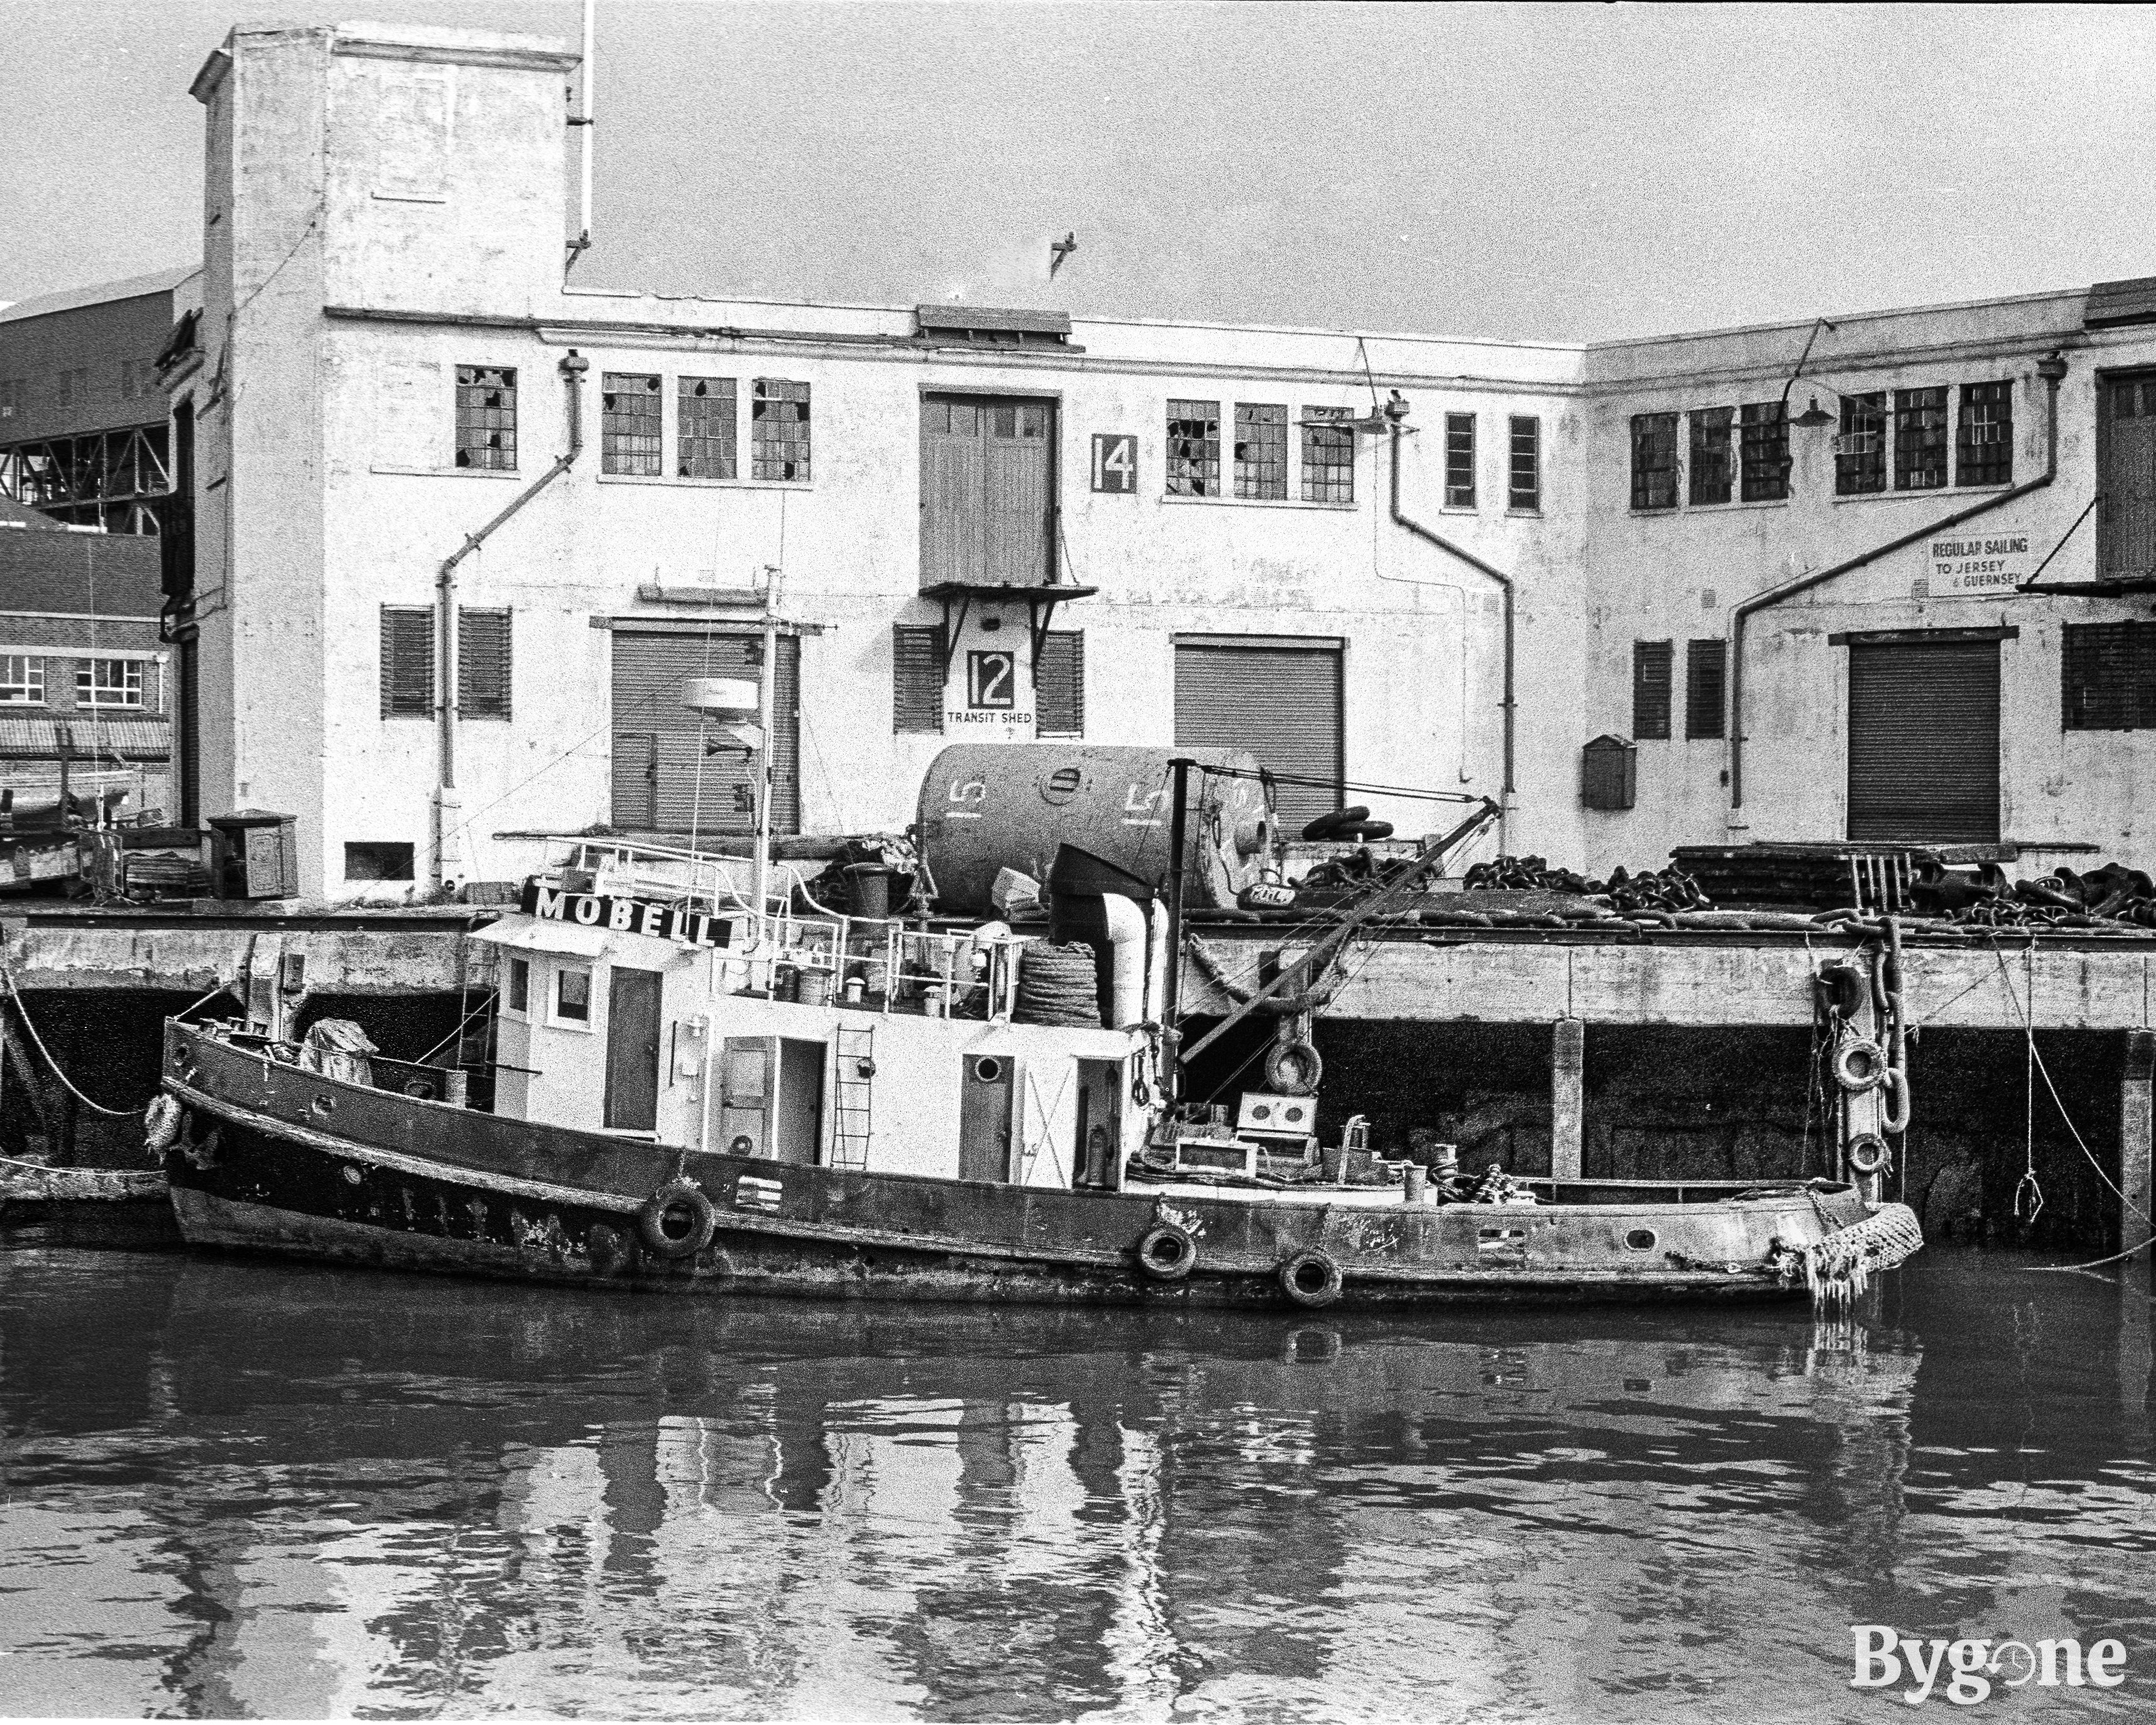 Moored boat, The Camber, Portsmouth, 1970s